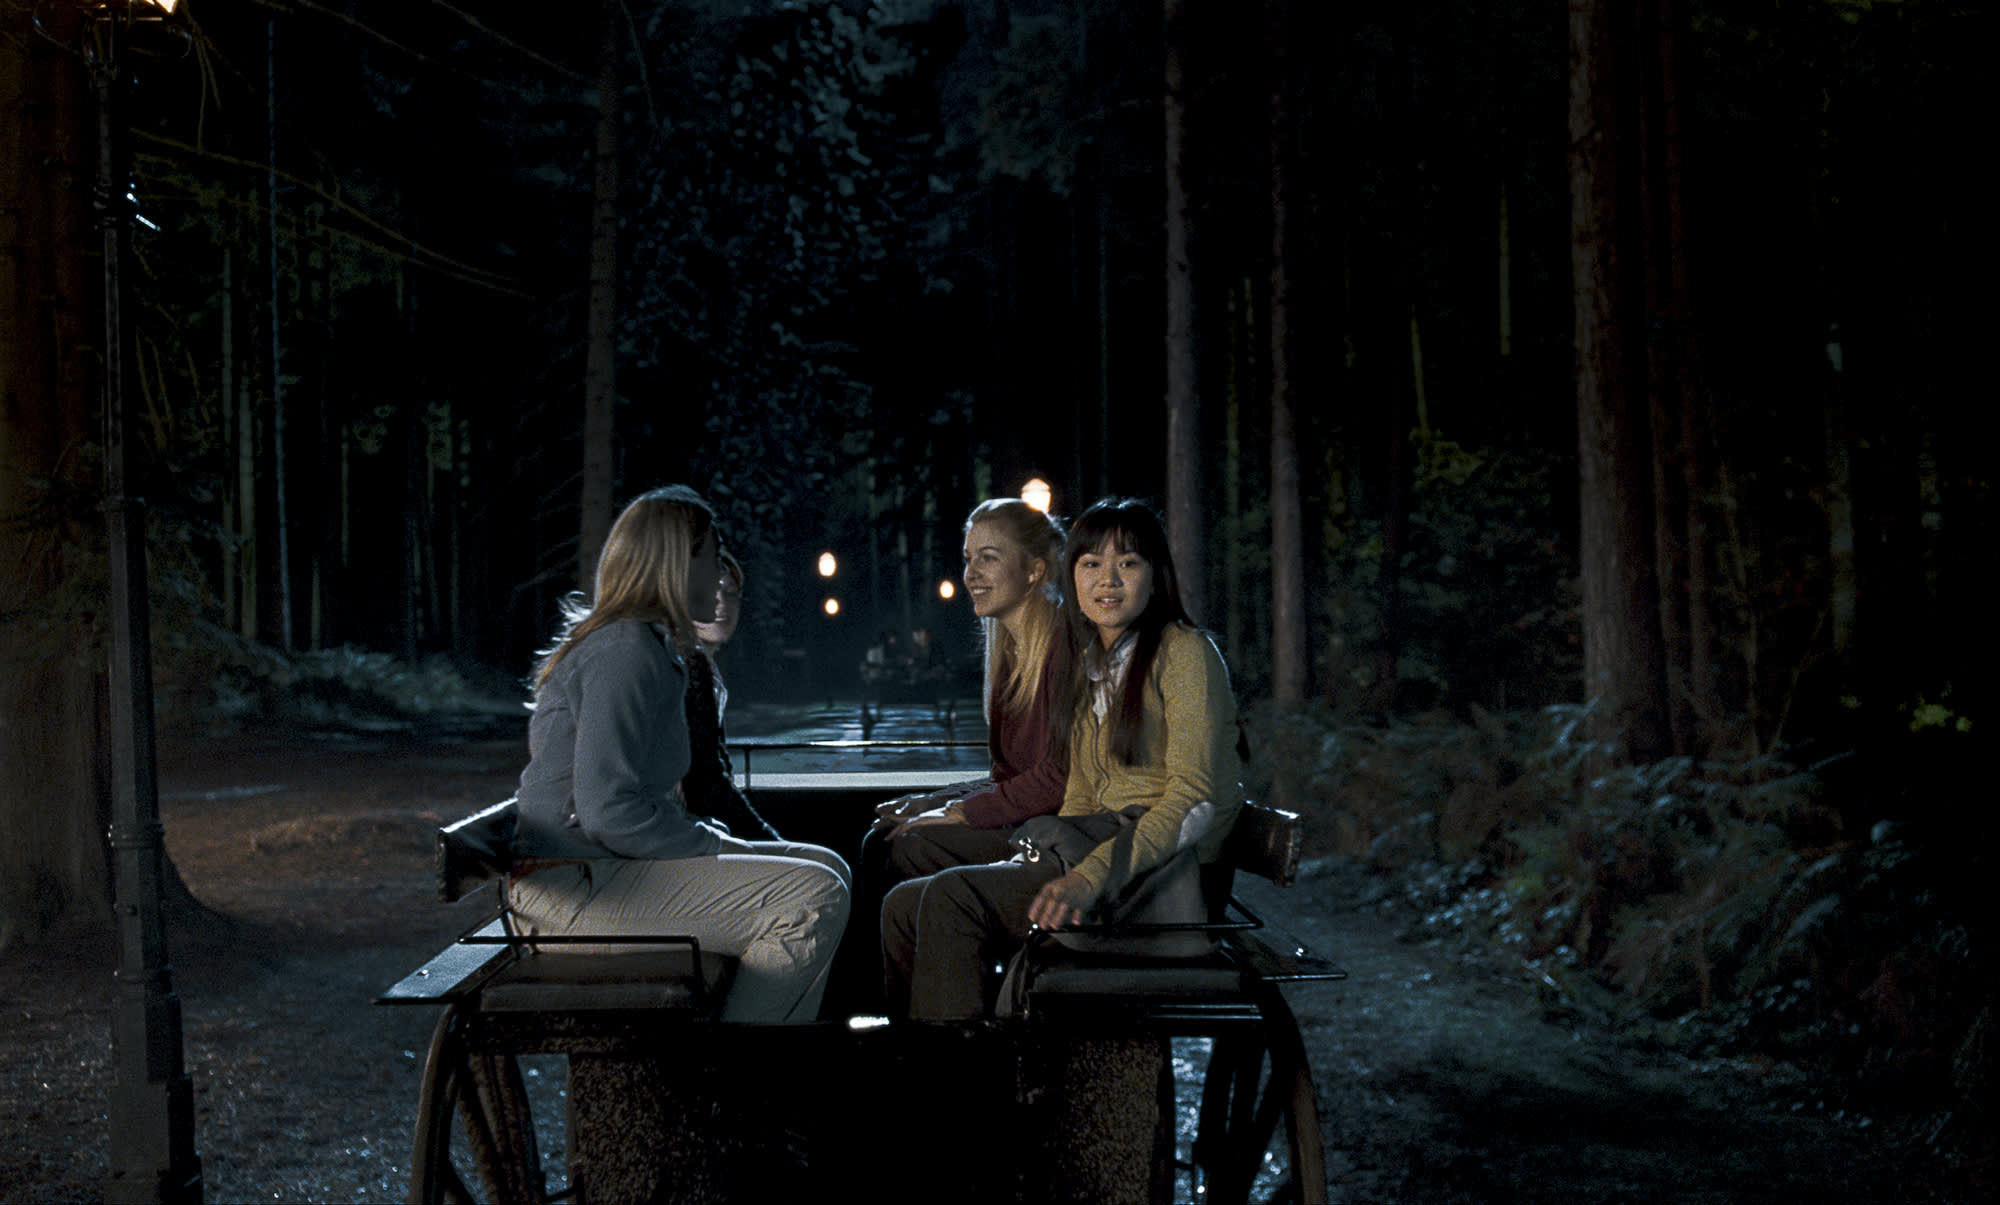 WB-HP-F5-cho-chang-with-friends-in-forest